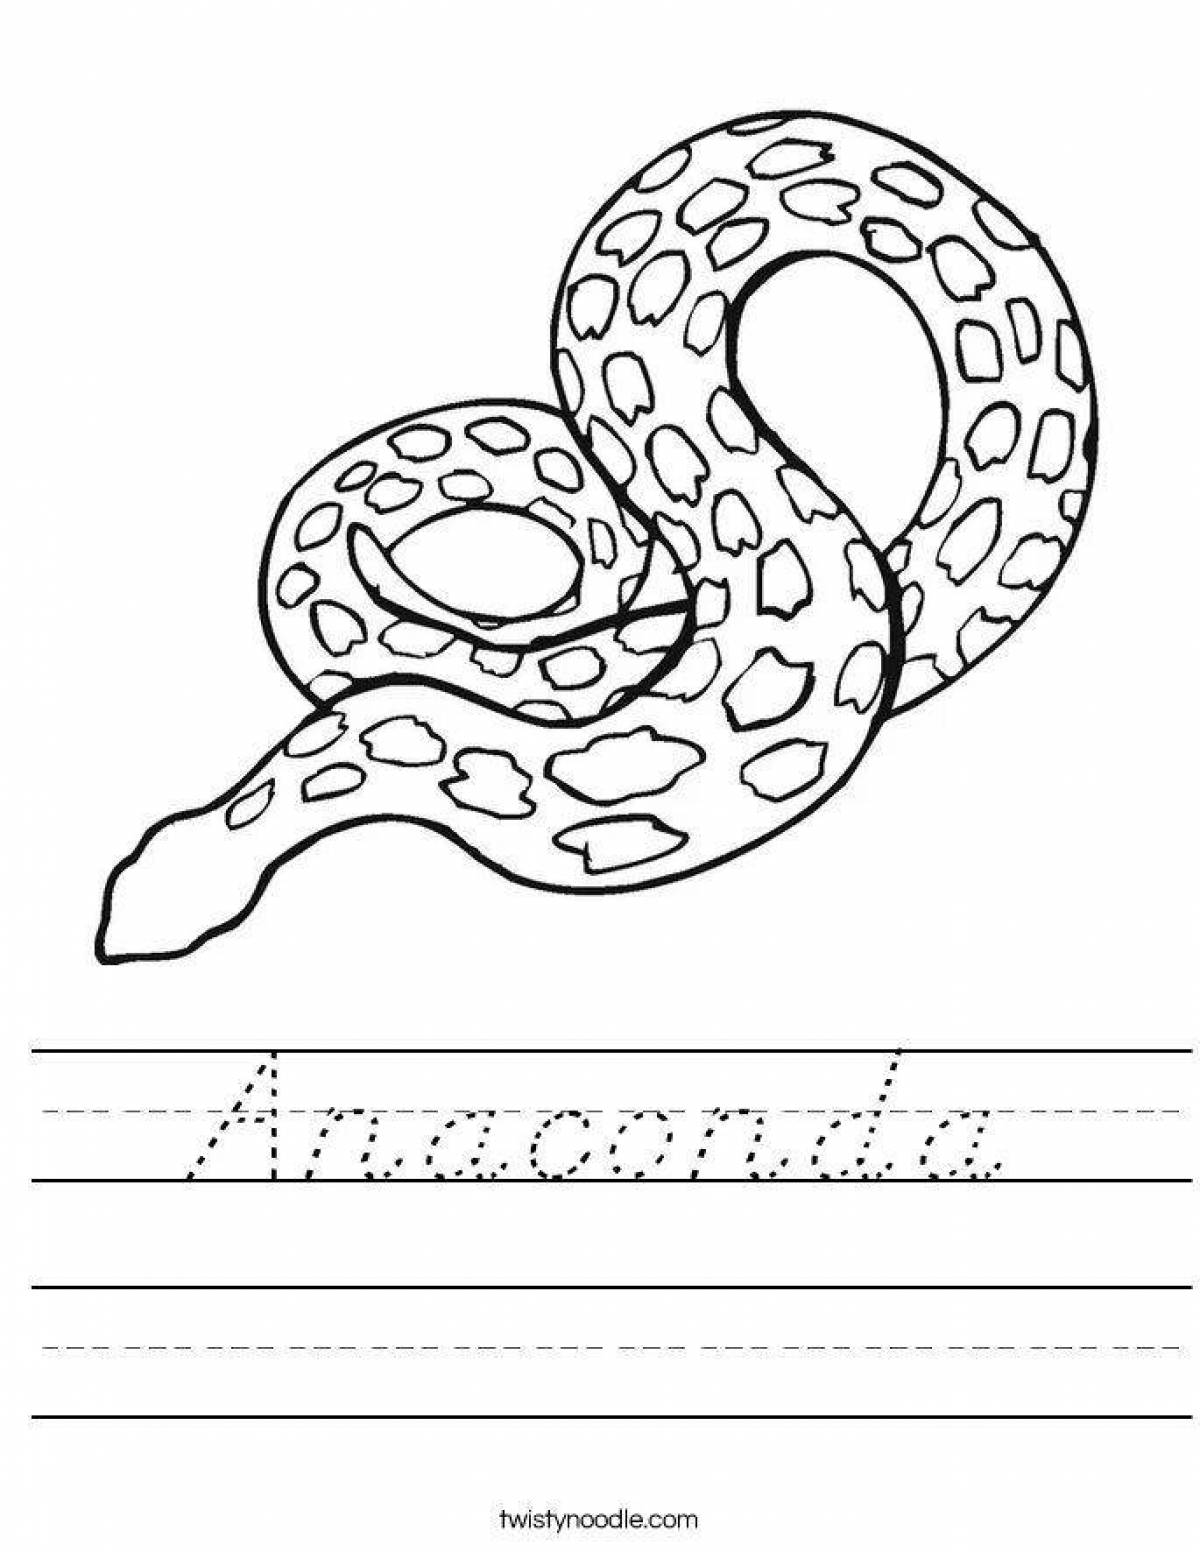 Lovely anaconda coloring page